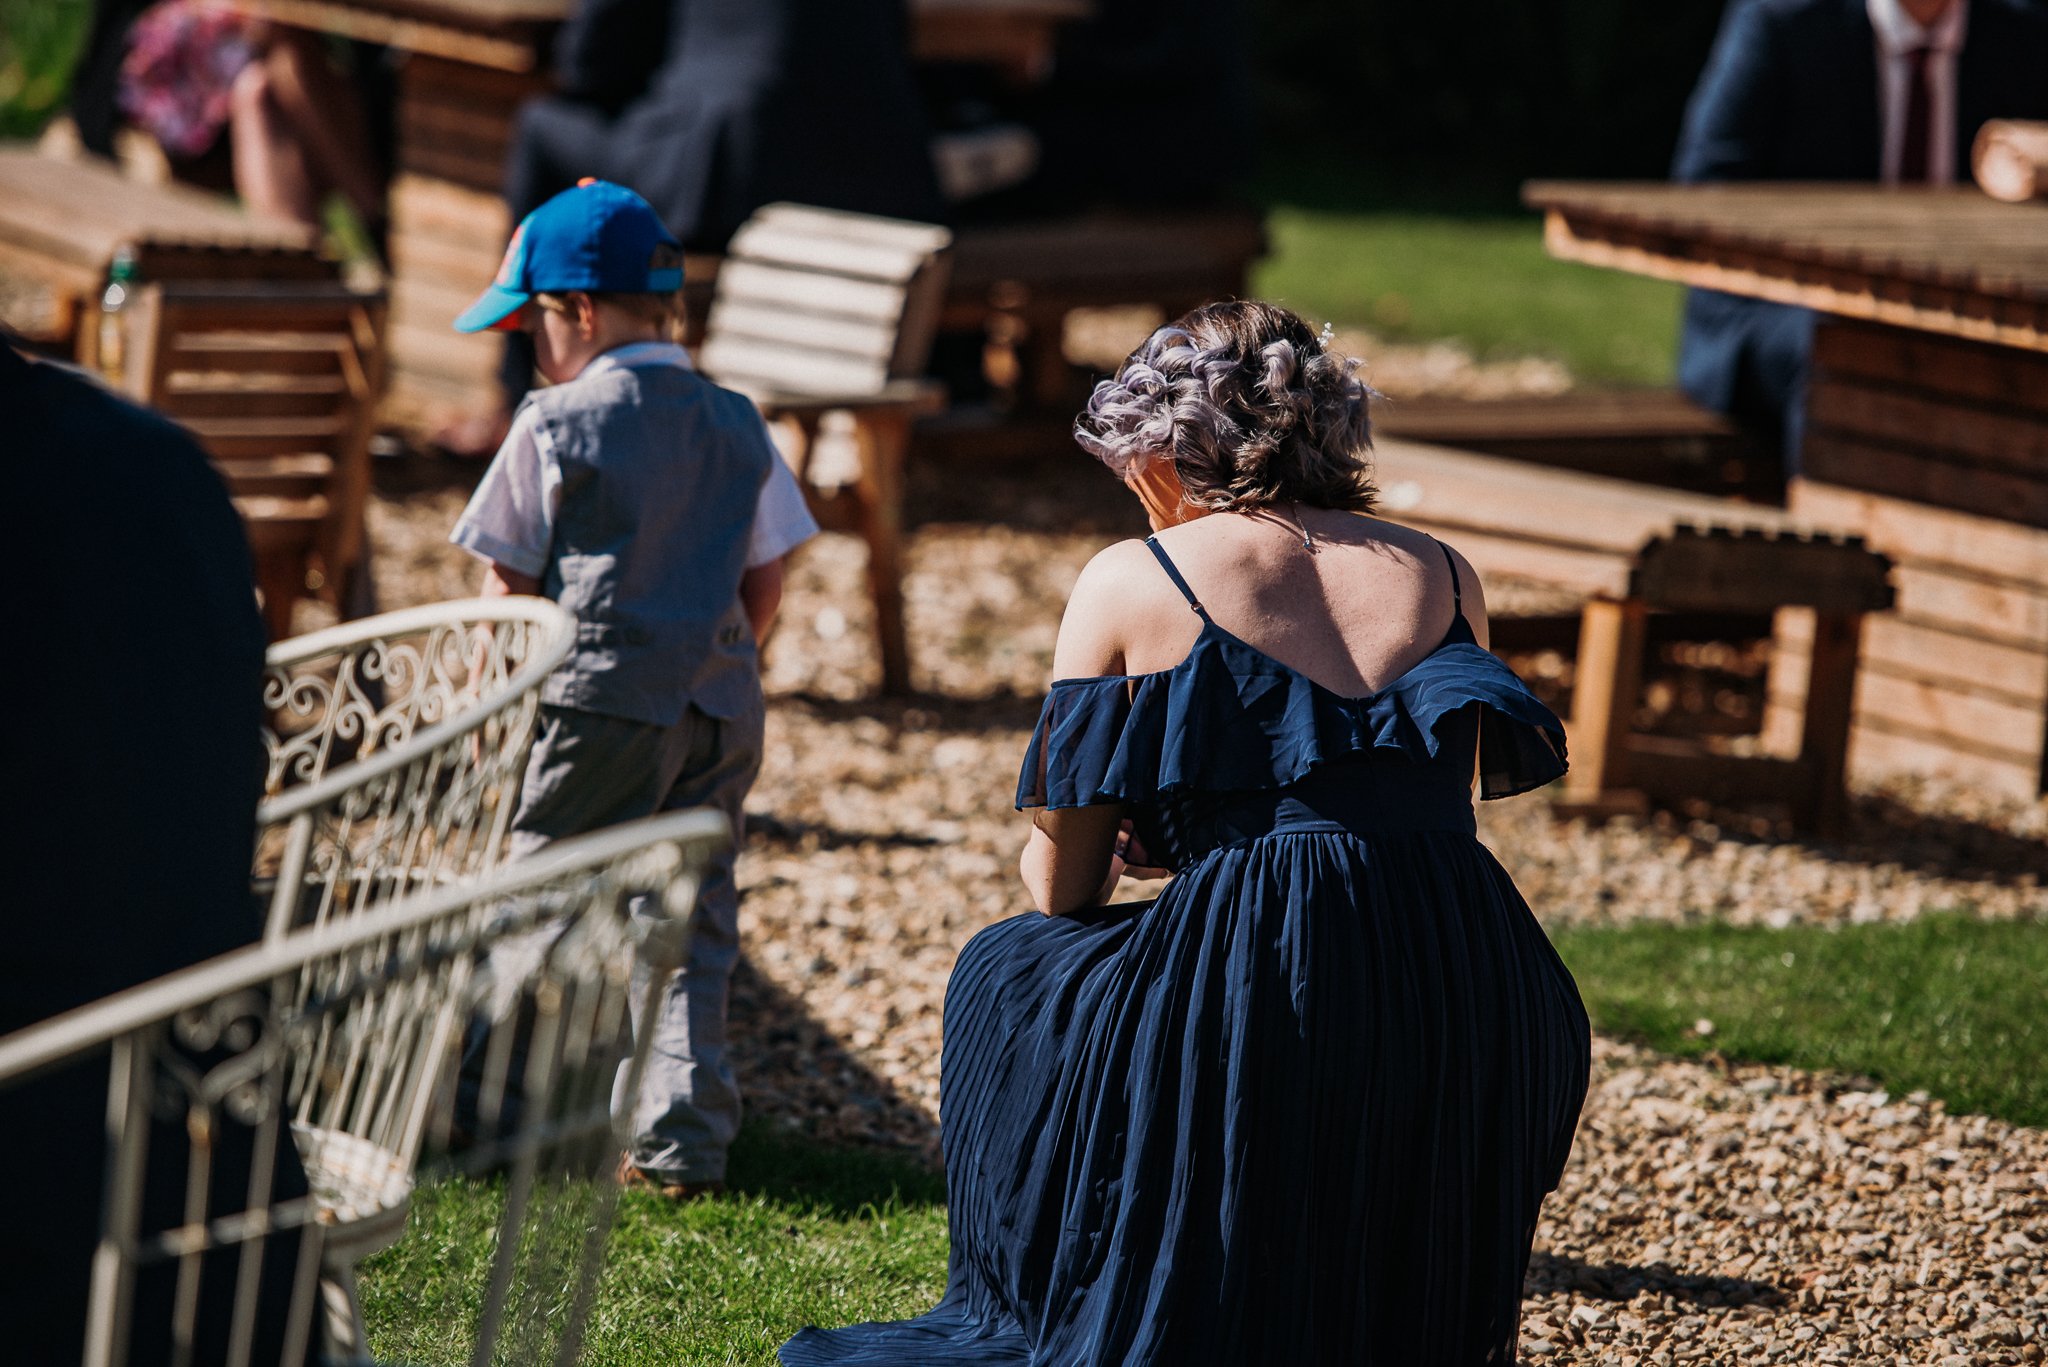 A bridemaid crouches down to see a young wedding guest at Sneaton Castle, Whitby.